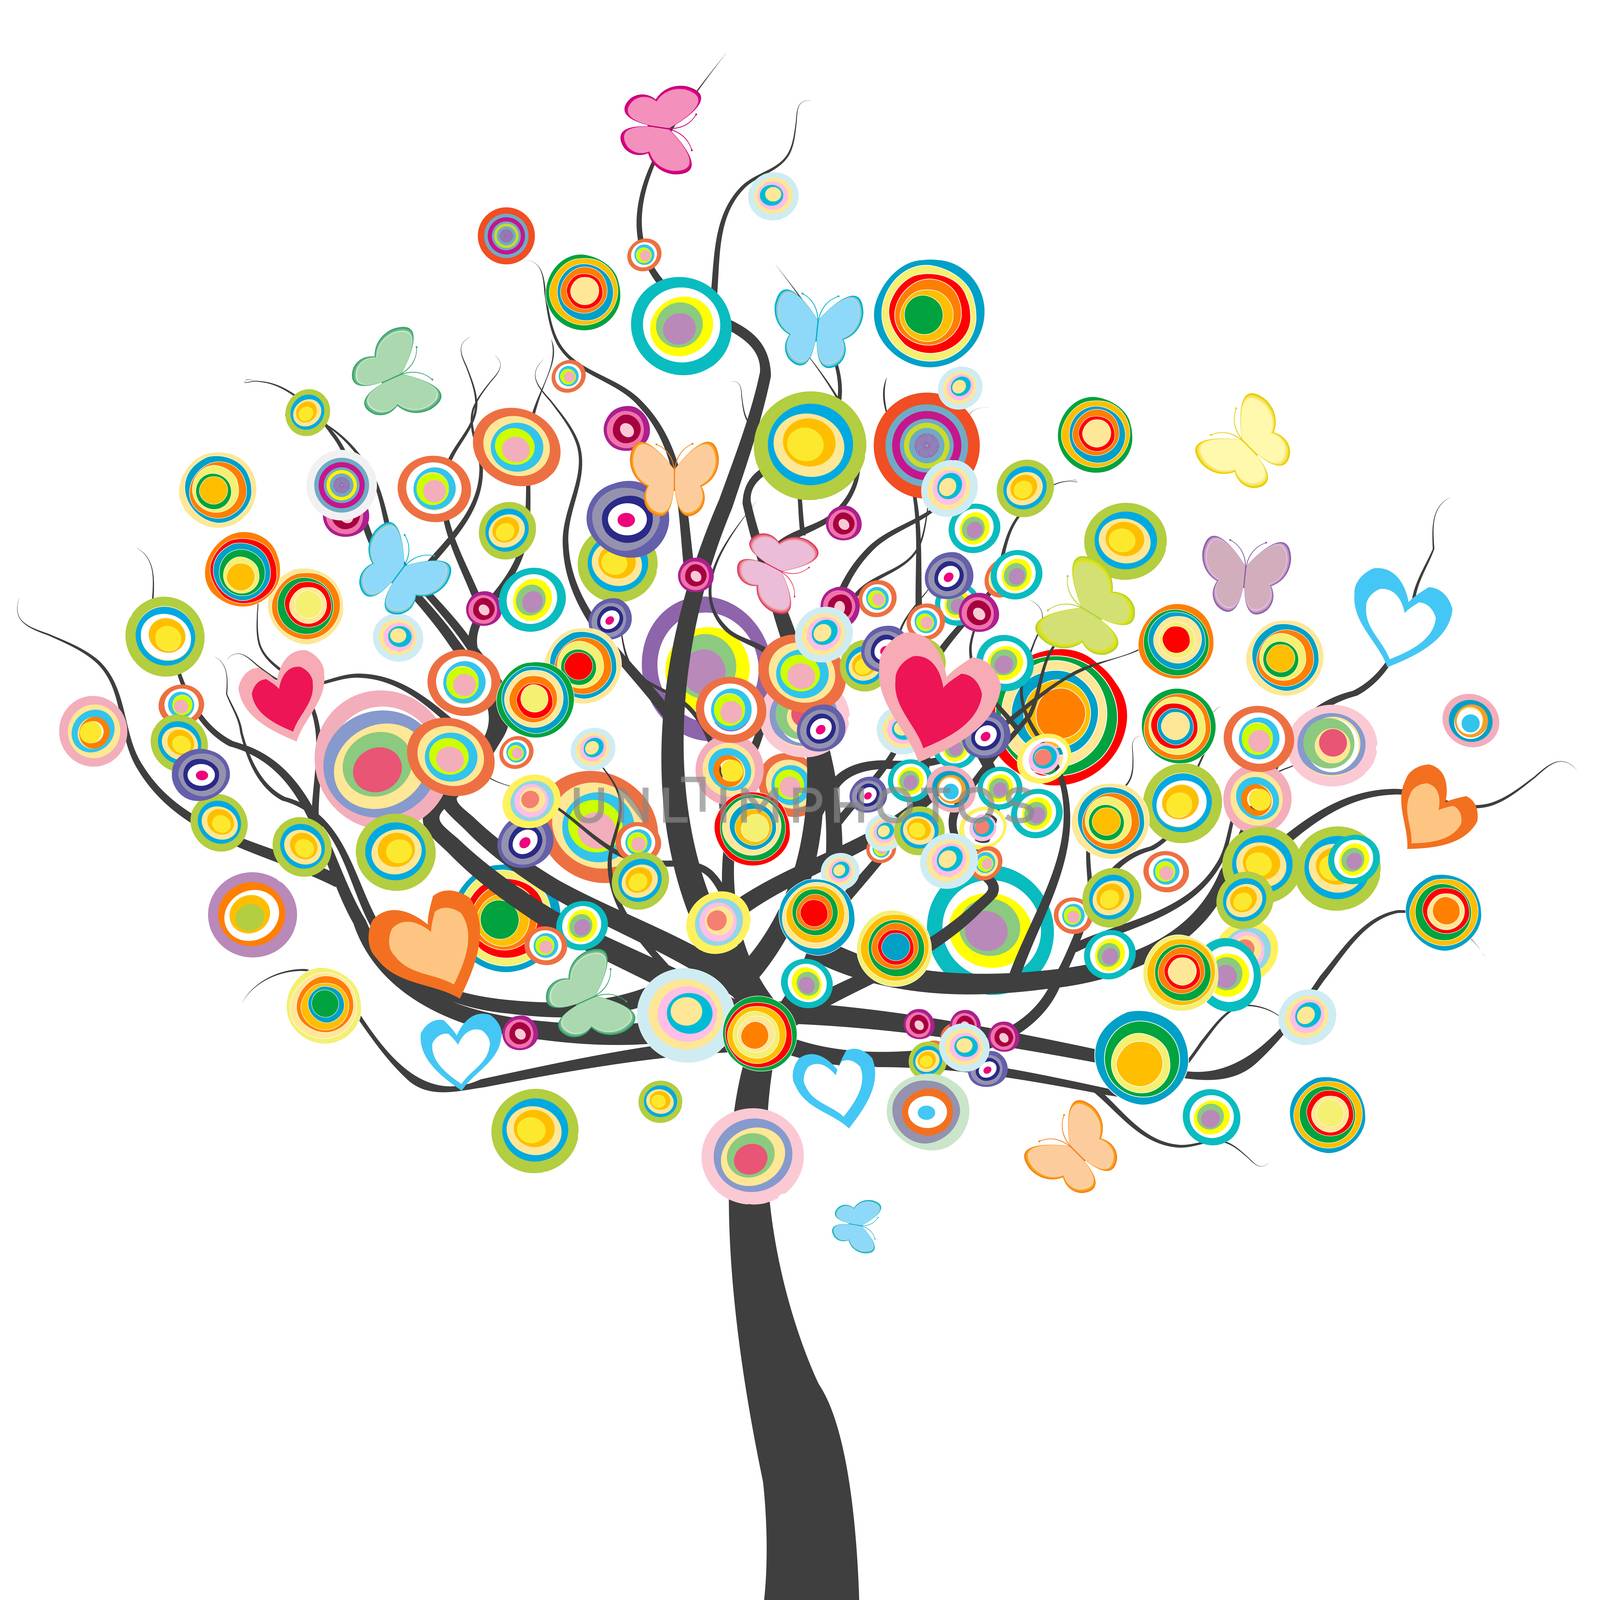 Colored tree with flowers, butterflies and circle shape leaves